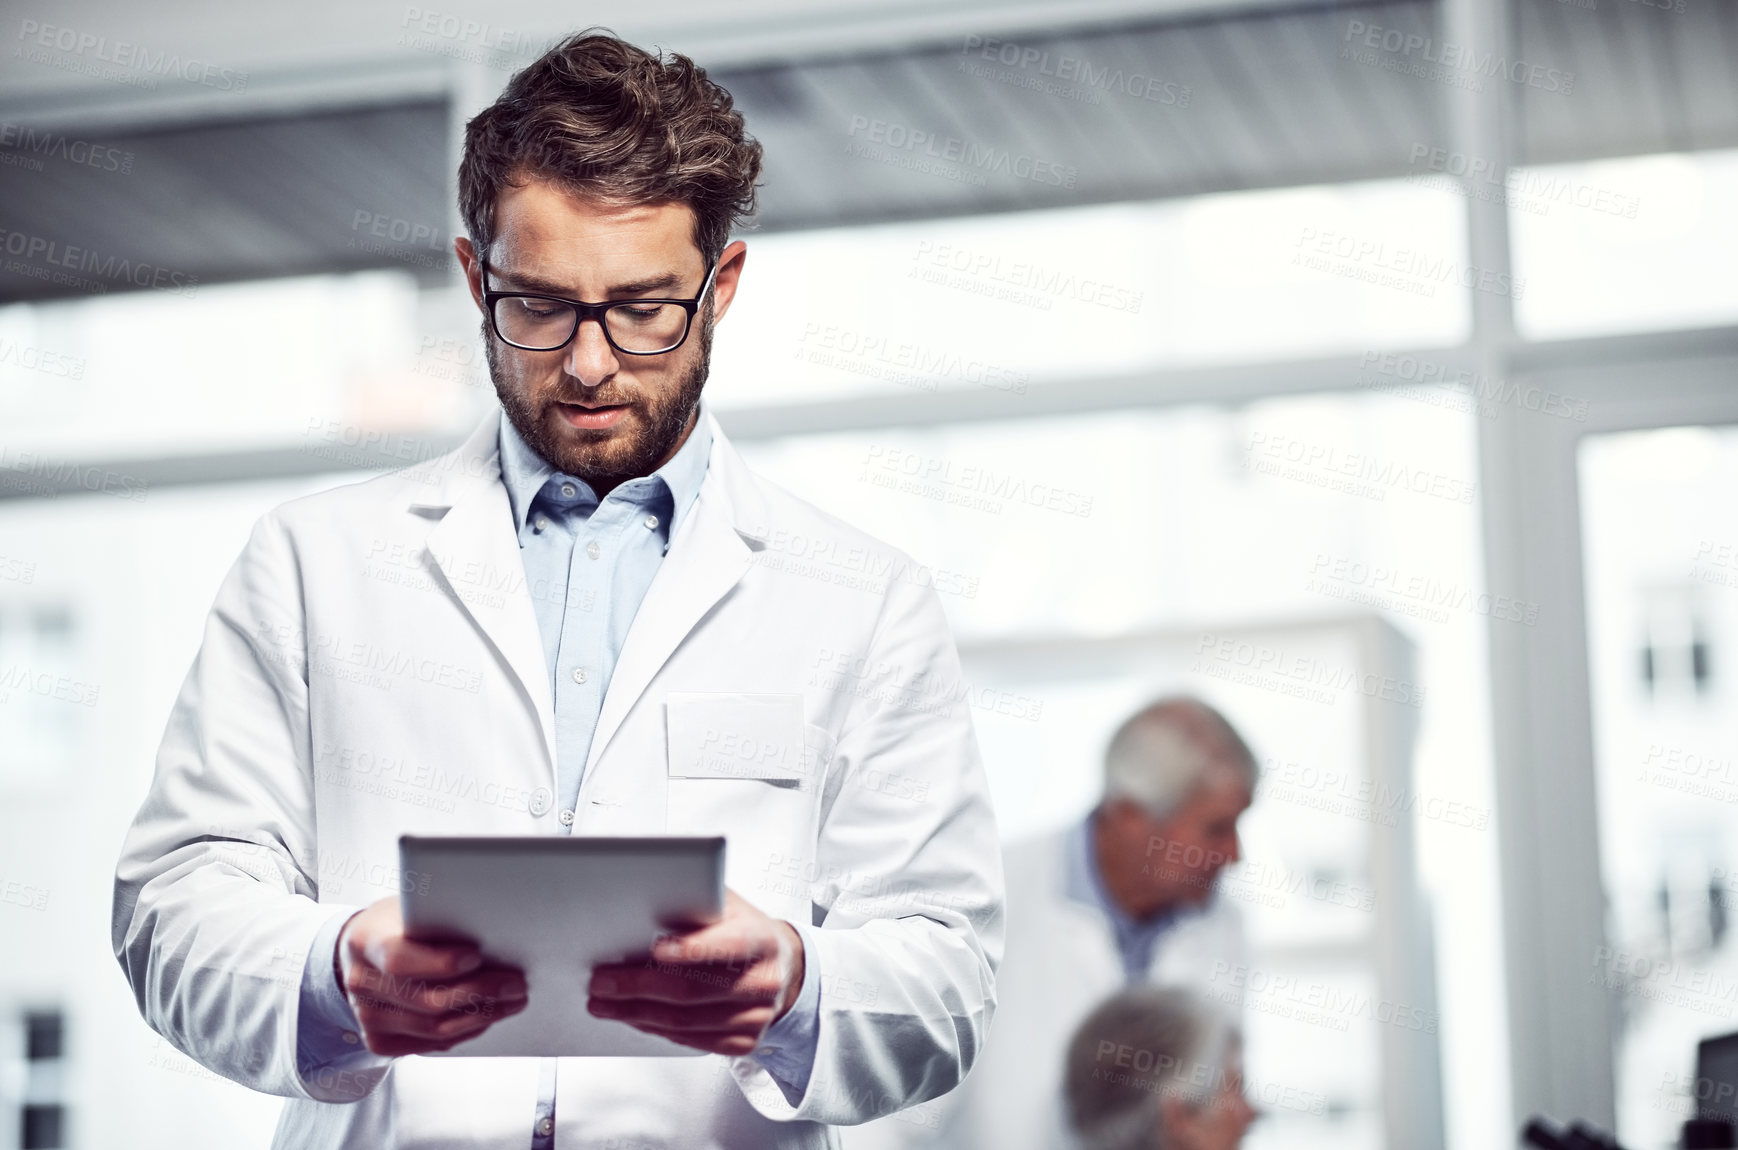 Buy stock photo Shot of a focused young male scientist using a digital tablet while standing inside of a laboratory